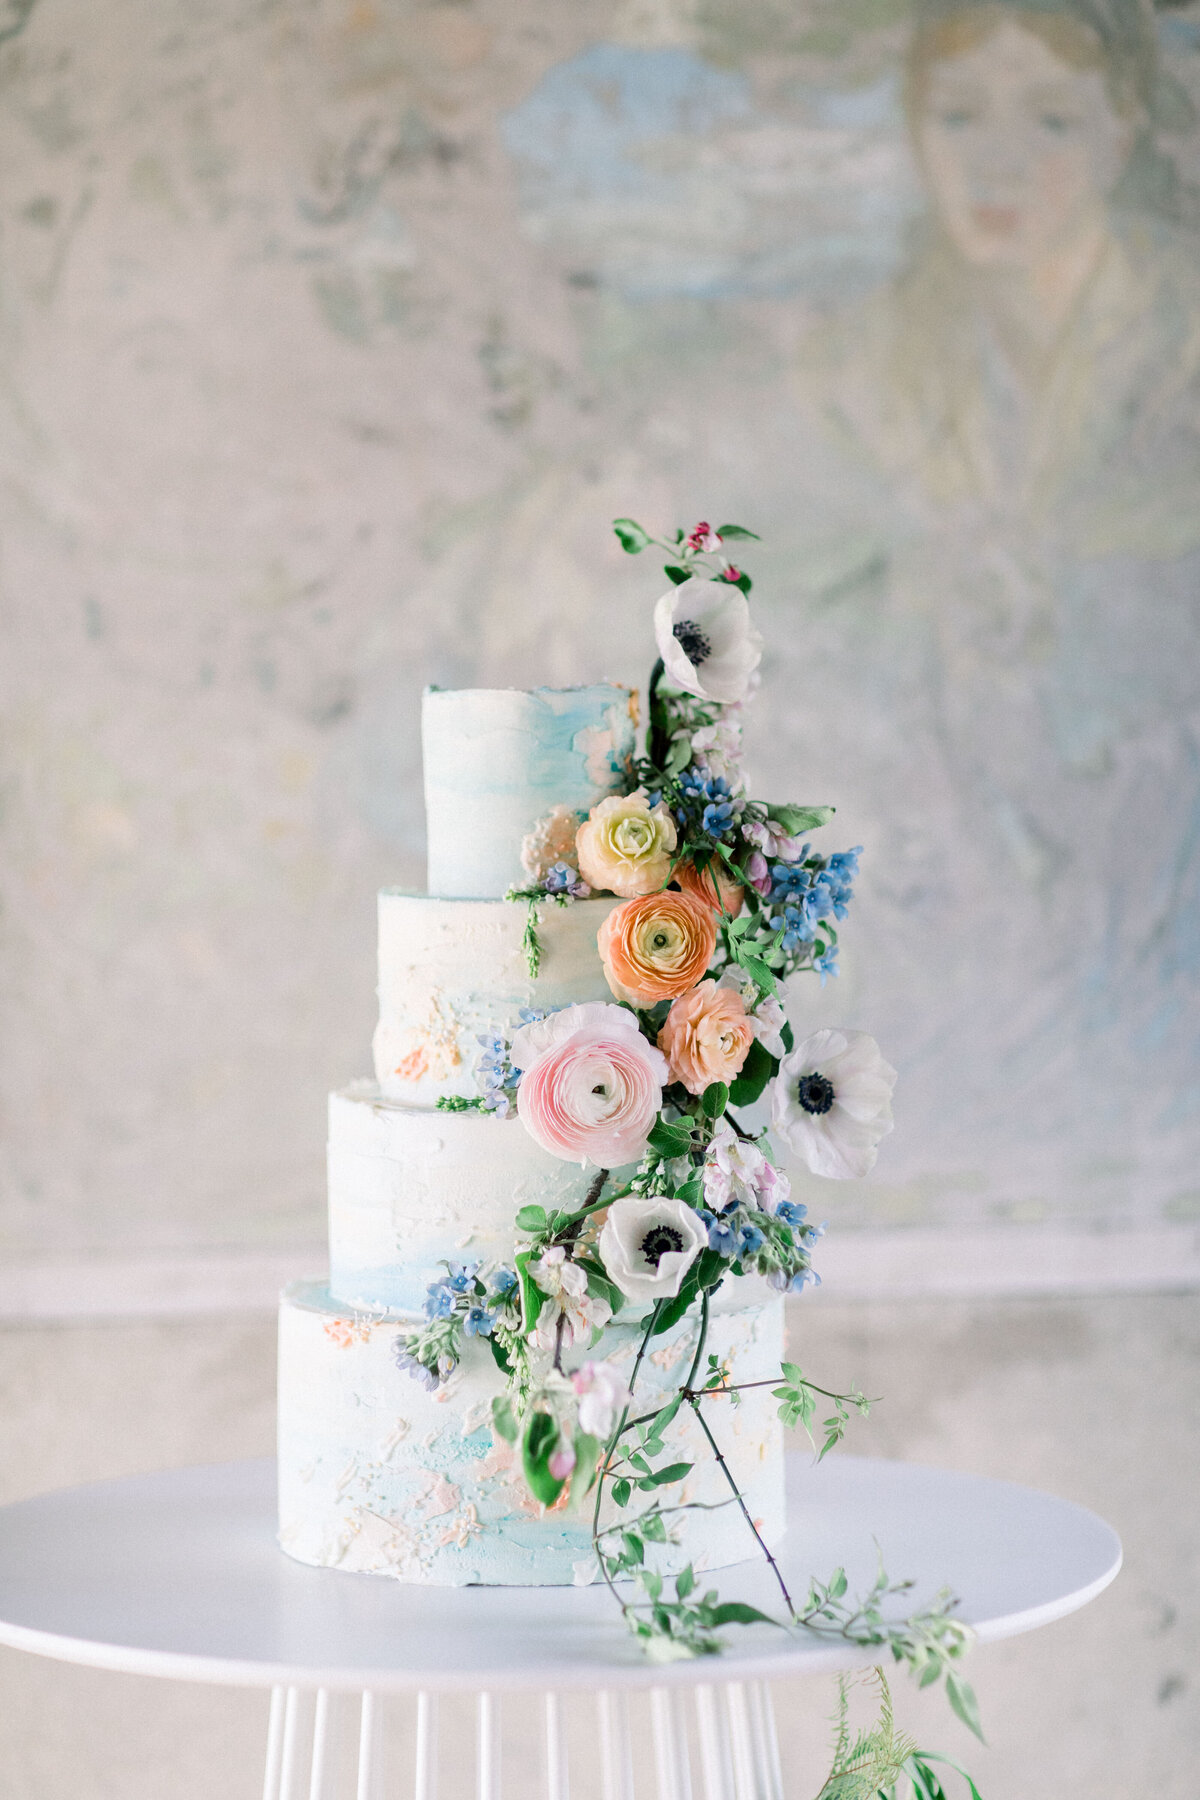 4 tiered wedding cake with florals